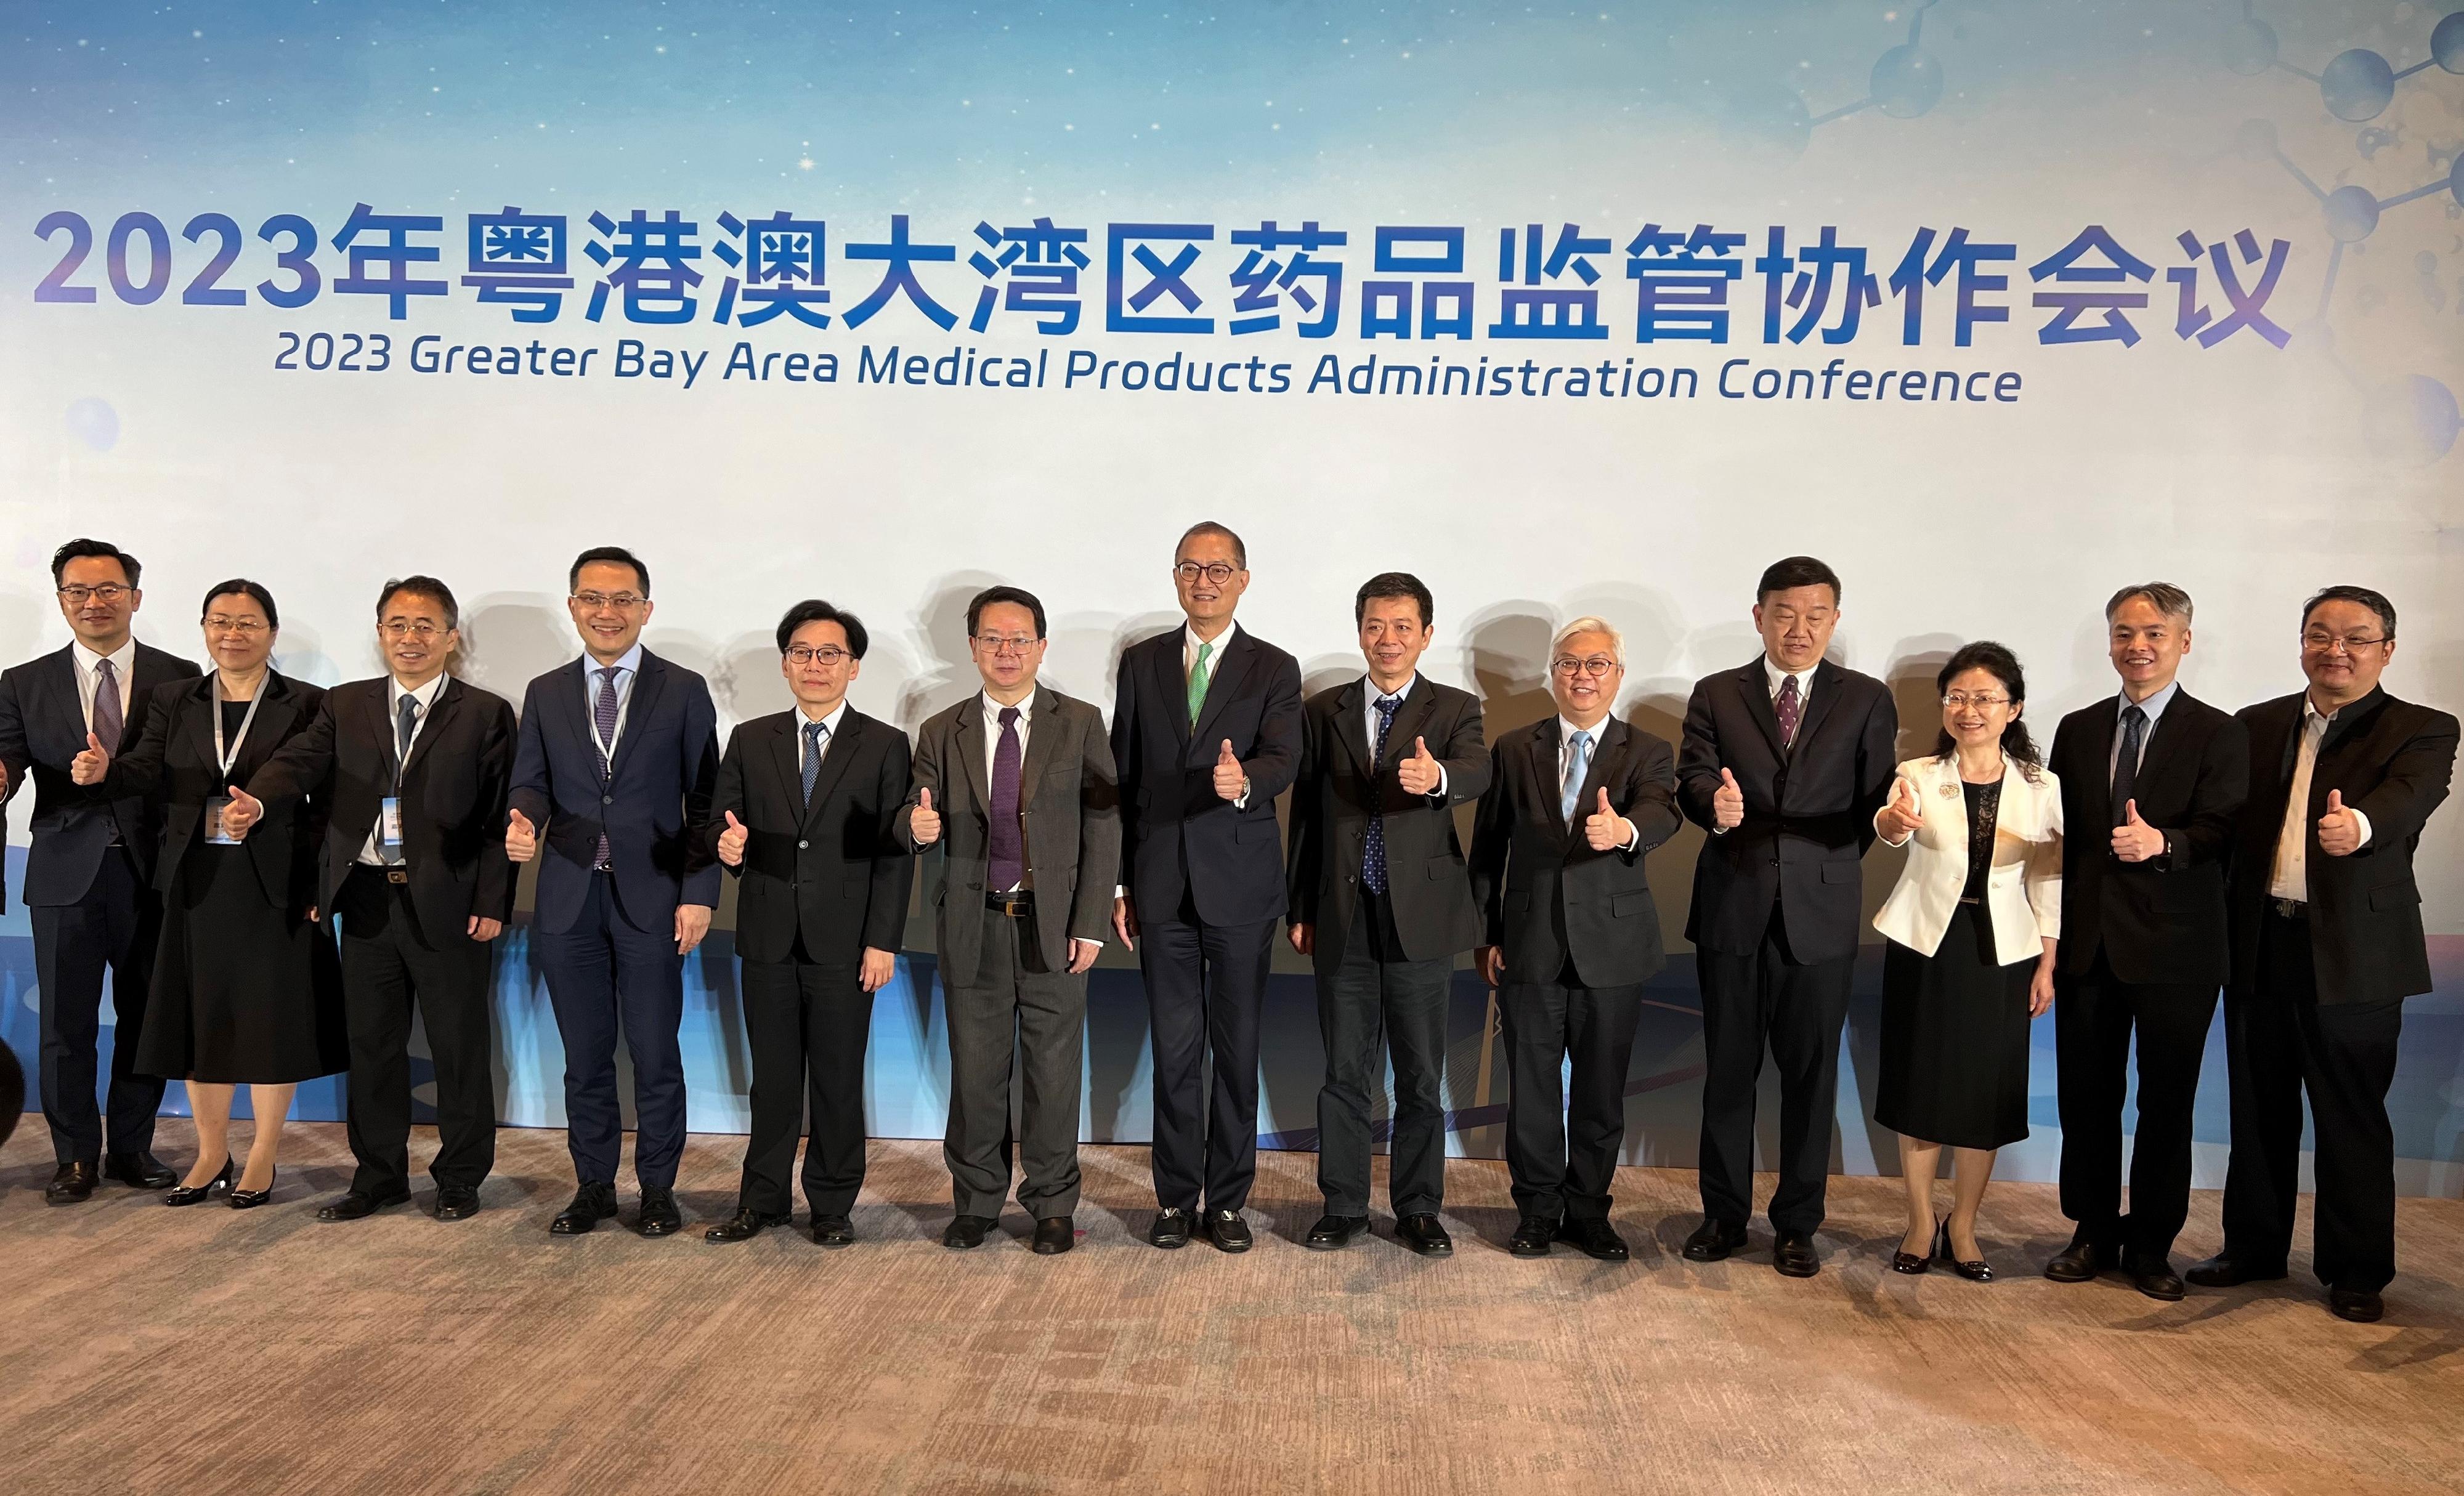 The Secretary for Health, Professor Lo Chung-mau, led a delegation to attend the 2023 Guangdong-Hong Kong-Macao Greater Bay Area Medical Products Administration Conference in Zhuhai today (October 25), and introduced the new initiatives in "The Chief Executive's 2023 Policy Address" of developing Hong Kong into a health and medical innovation hub. Photo shows Professor Lo (centre); Deputy Commissioner of the National Medical Products Administration Mr Zhao Junning (sixth left); the General Director of the Guangdong Provincial Medical Products Administration, Mr Jiang Xiaodong (sixth right); the Director of Health, Dr Ronald Lam (fourth left); Deputy Secretary for Health Mr Eddie Lee (first left); and other attendees of the Conference.